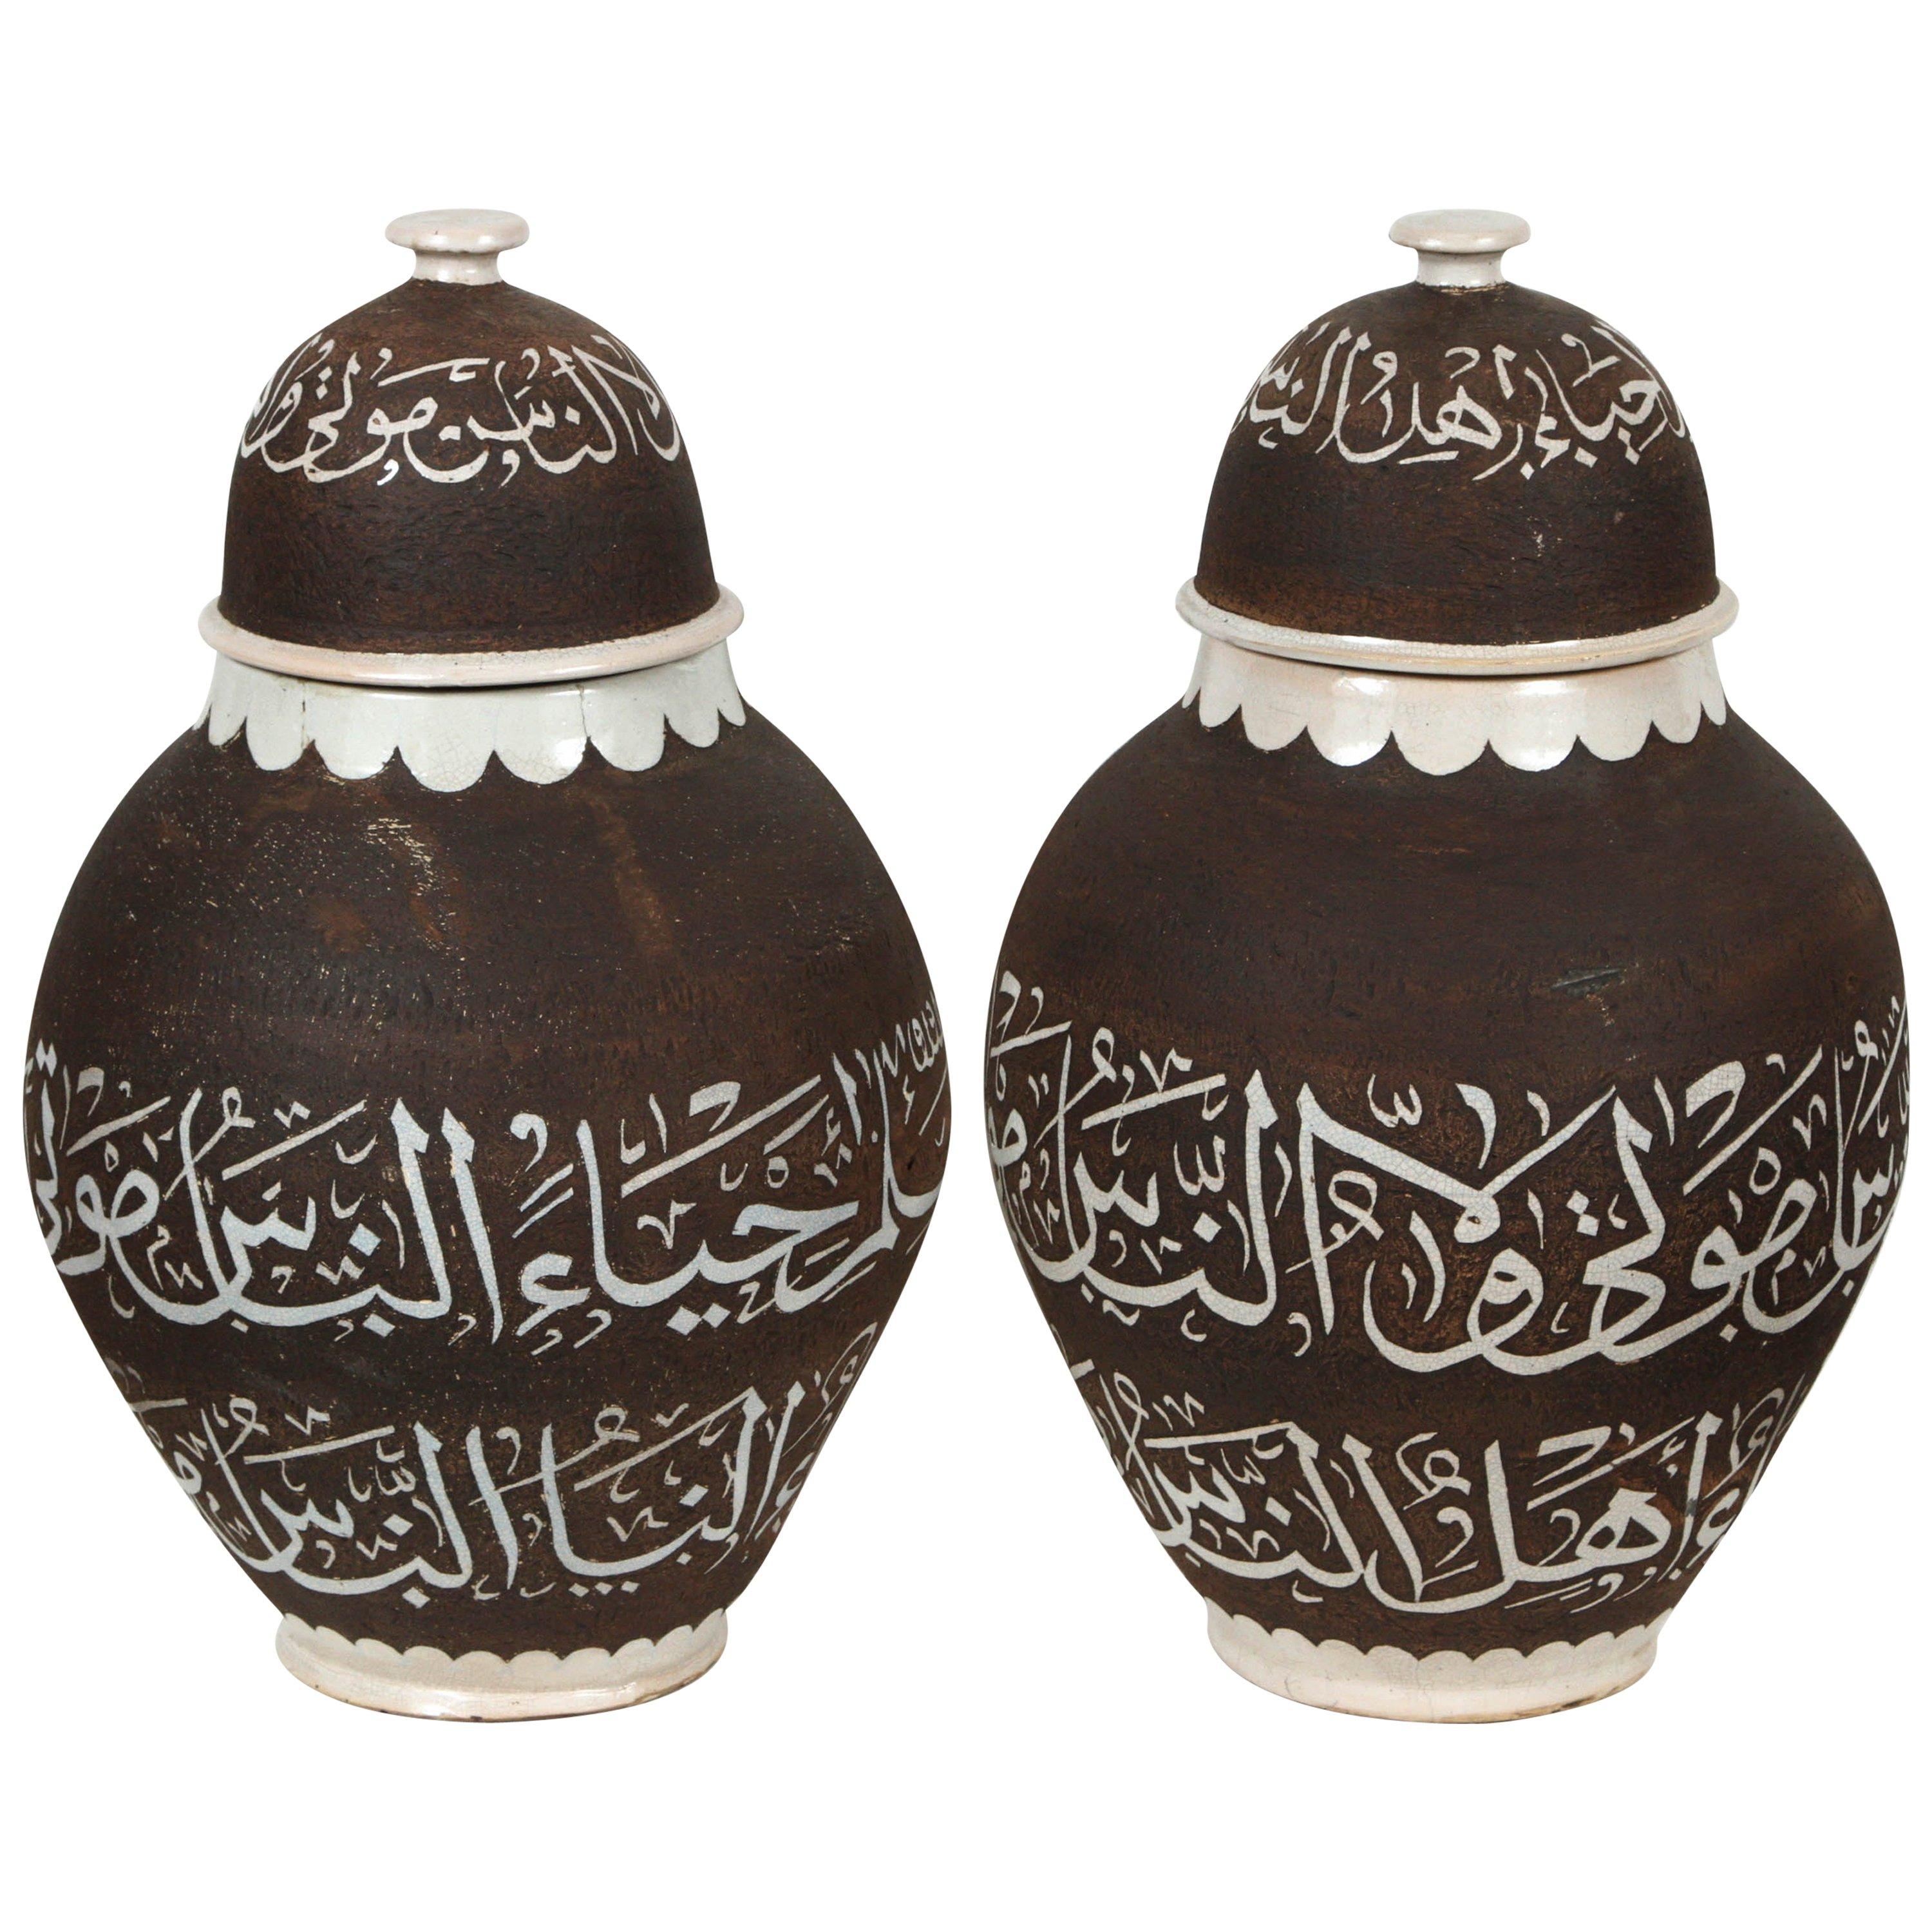 Pair of Moroccan Ceramic Urns with Arabic Calligraphy Designs For Sale